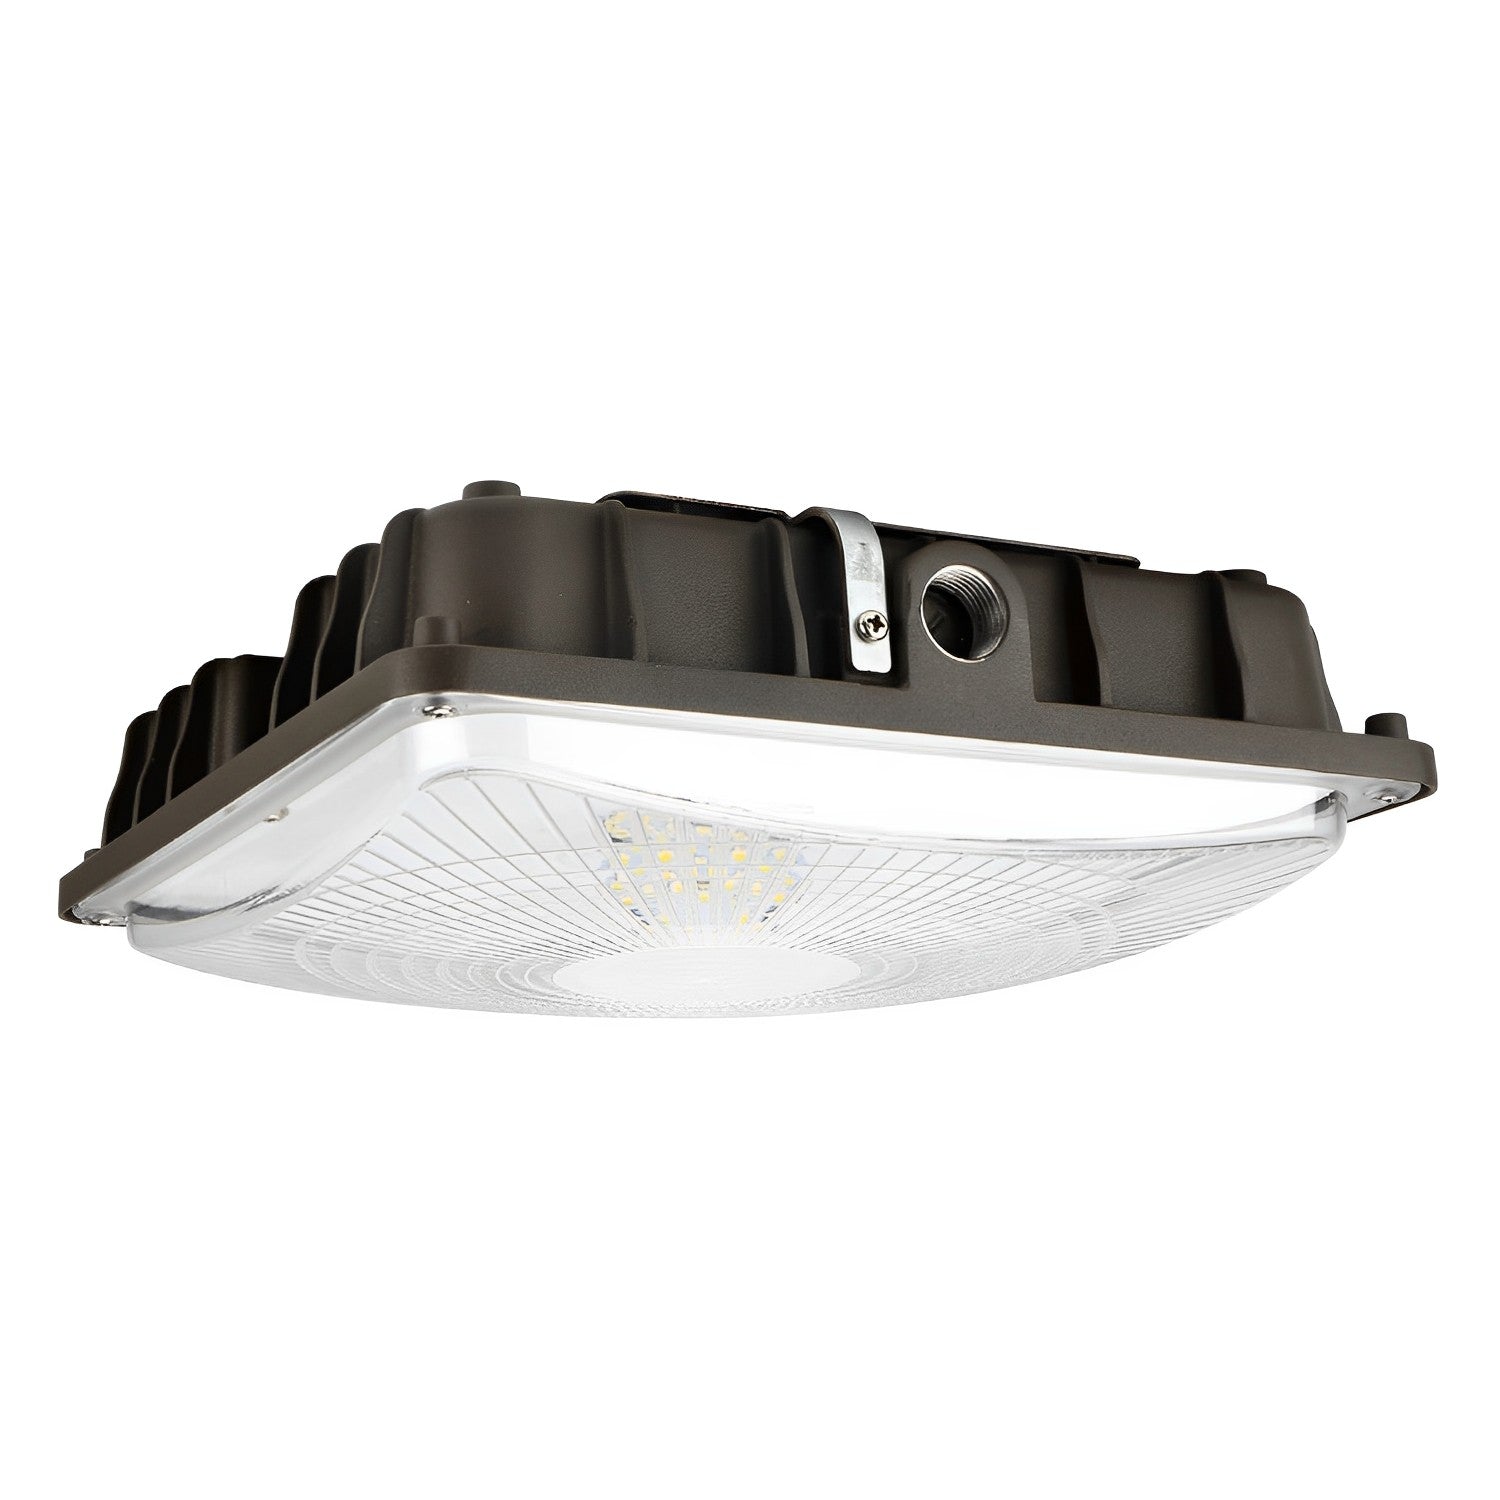 Image of 27W warehouse lighting fixture or led canopy light fixture